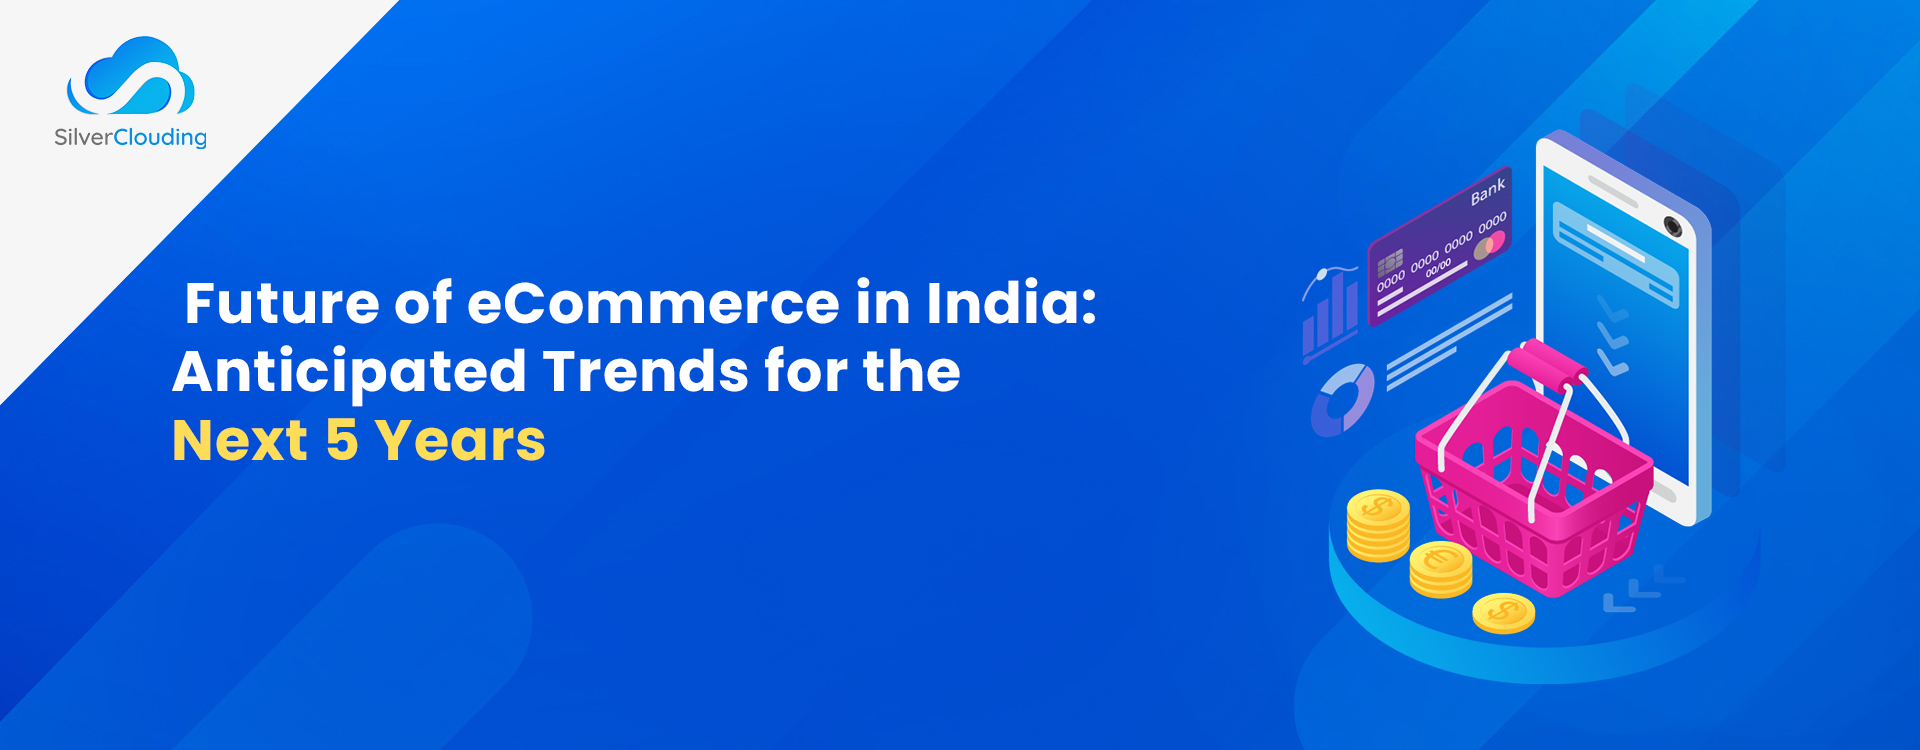 Future of eCommerce in India: Anticipated Trends for the Next 5 Years